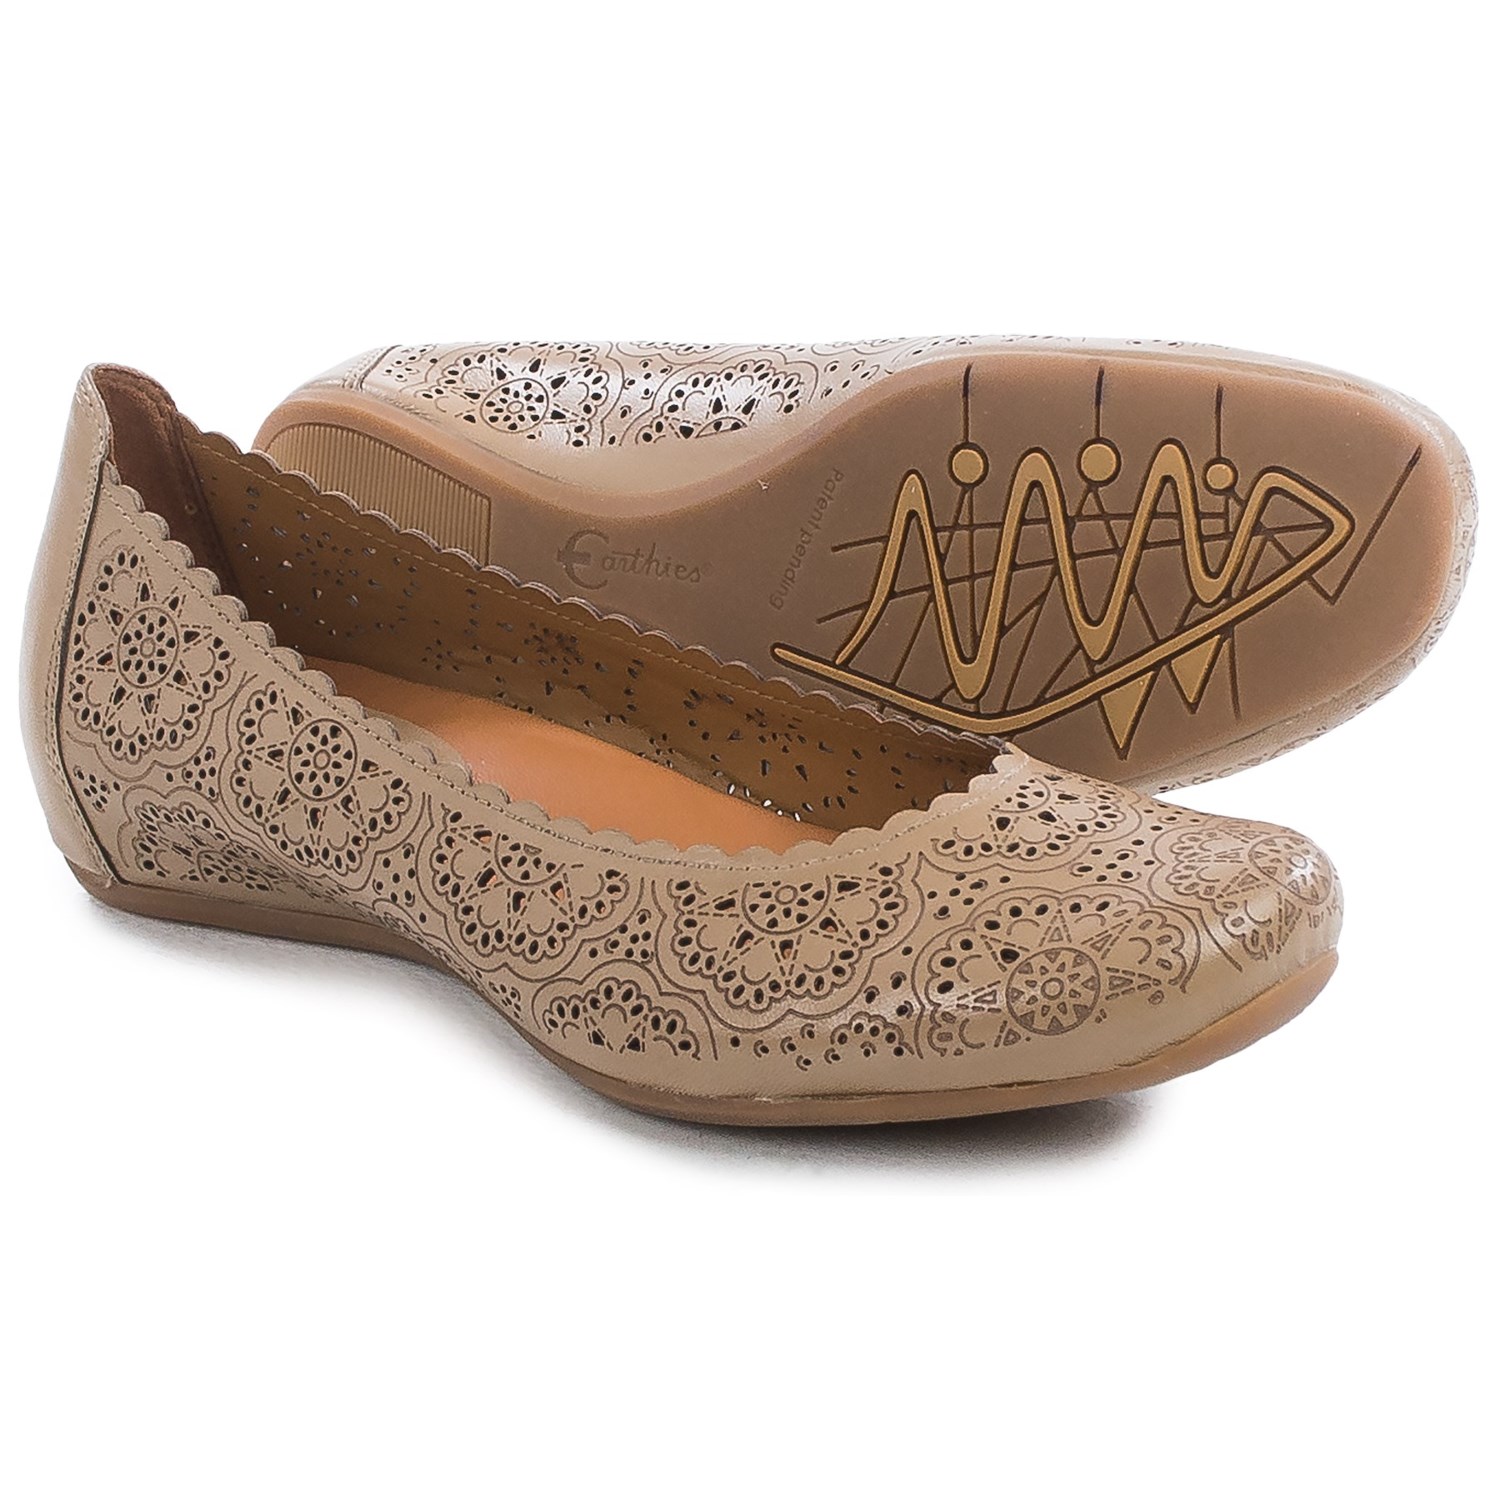 Earthies Bindi Leather Ballet Flats (For Women) - Save 57%